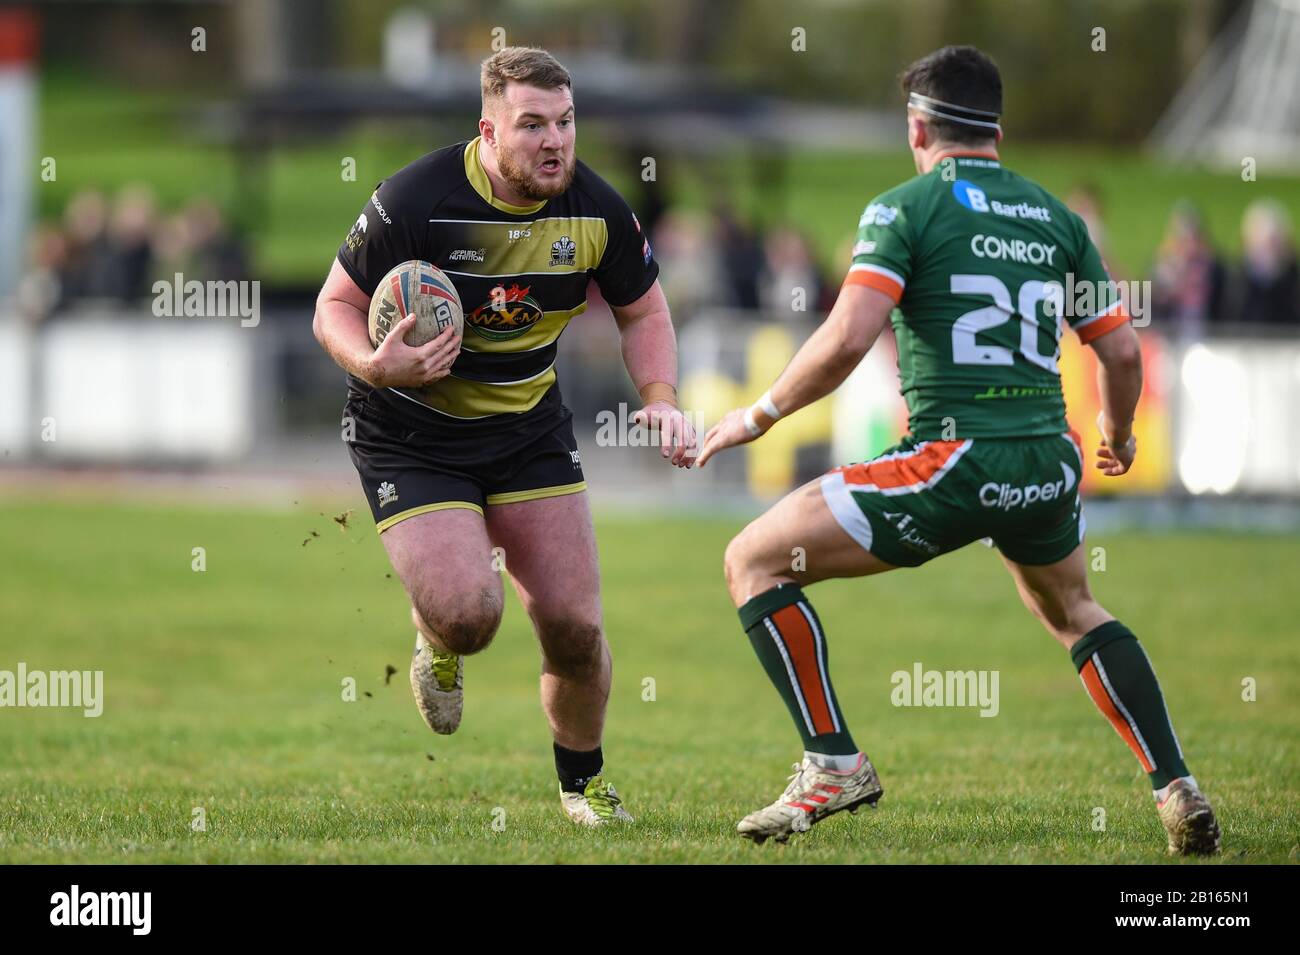 23th February 2020, Queensway Stadium, Wrexham, Wales; Coral Challenge Cup, North Wales Crusaders v Hunslet : Jack Cottington (16) of North Wales Crus Stock Photo